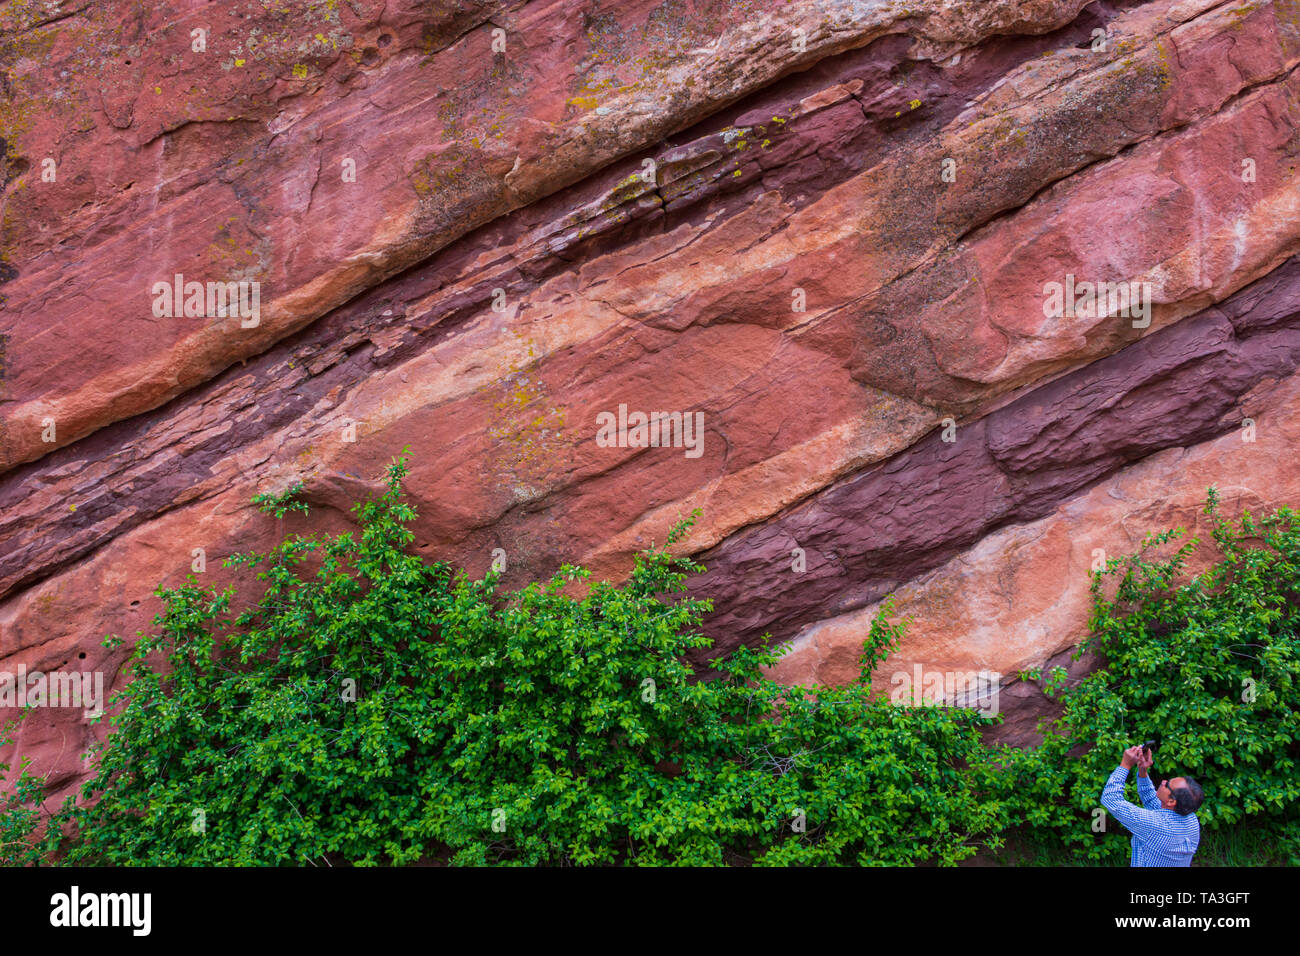 A tourist at Red Rocks Amphitheater in Morrison Colorado stops to take a picture of the colorful rock formations. Photo was taken in May. Stock Photo